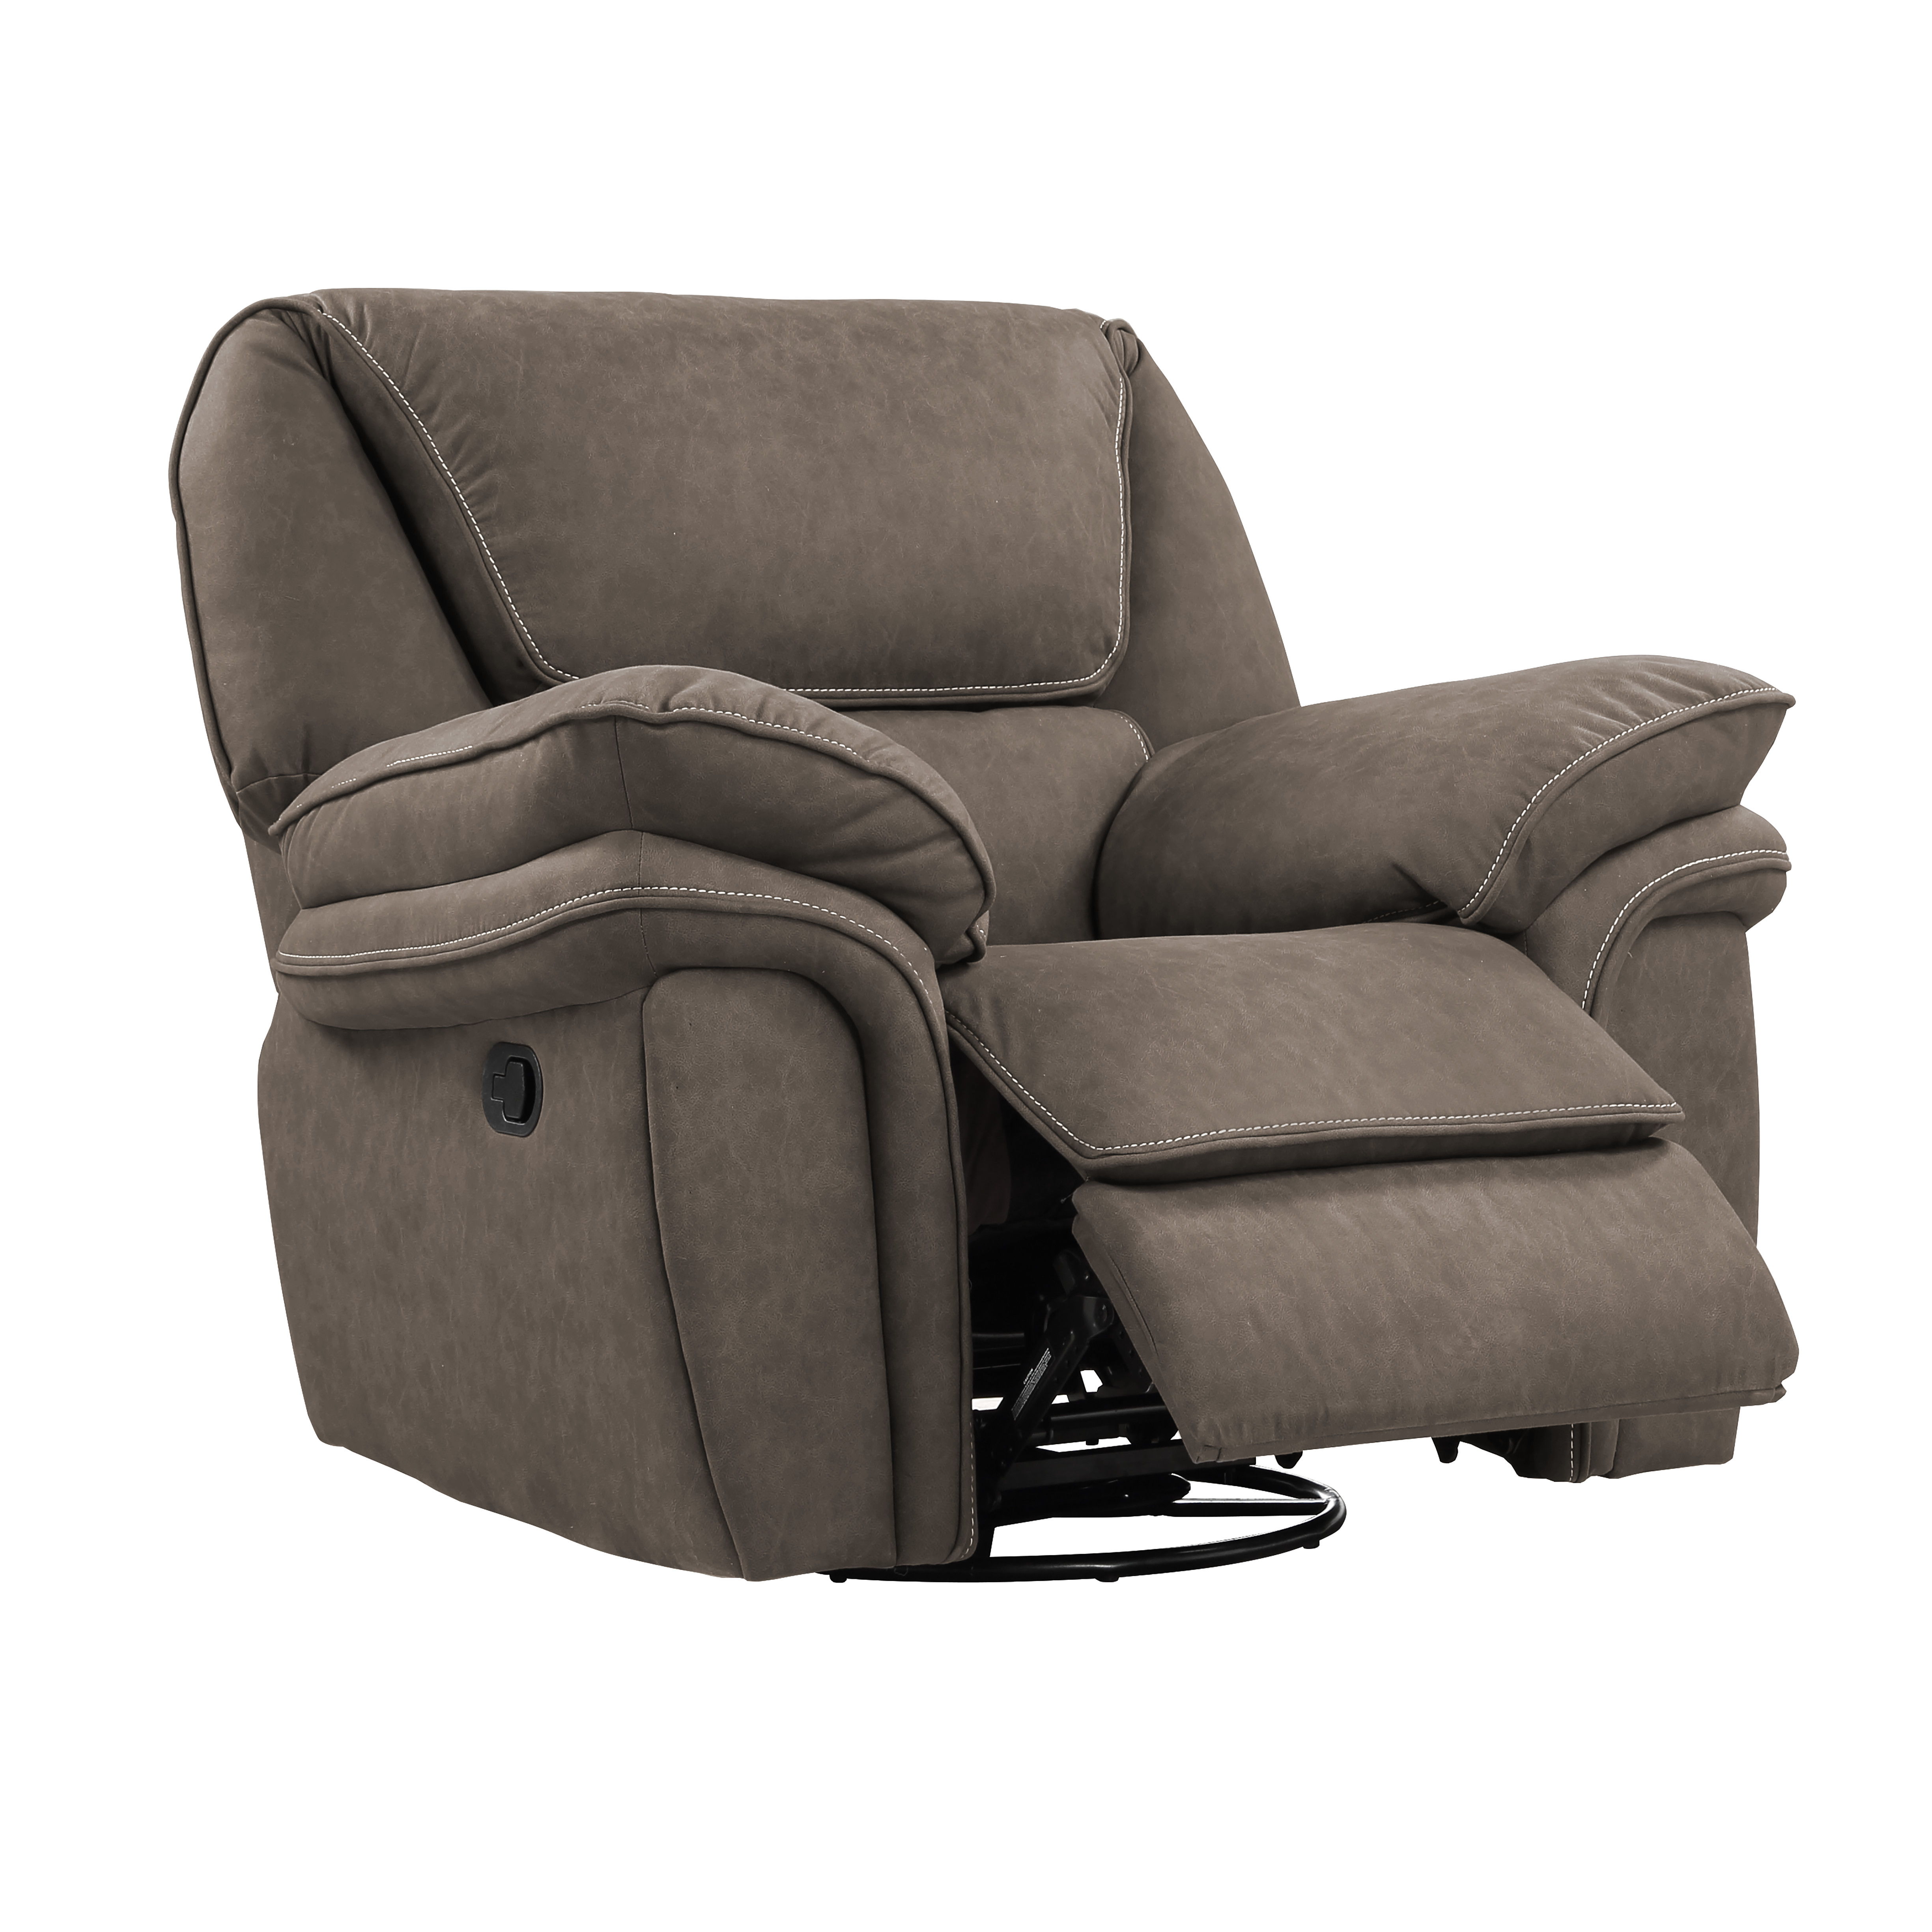 Allyn - Swivel Glider Recliner - Gray Taupe